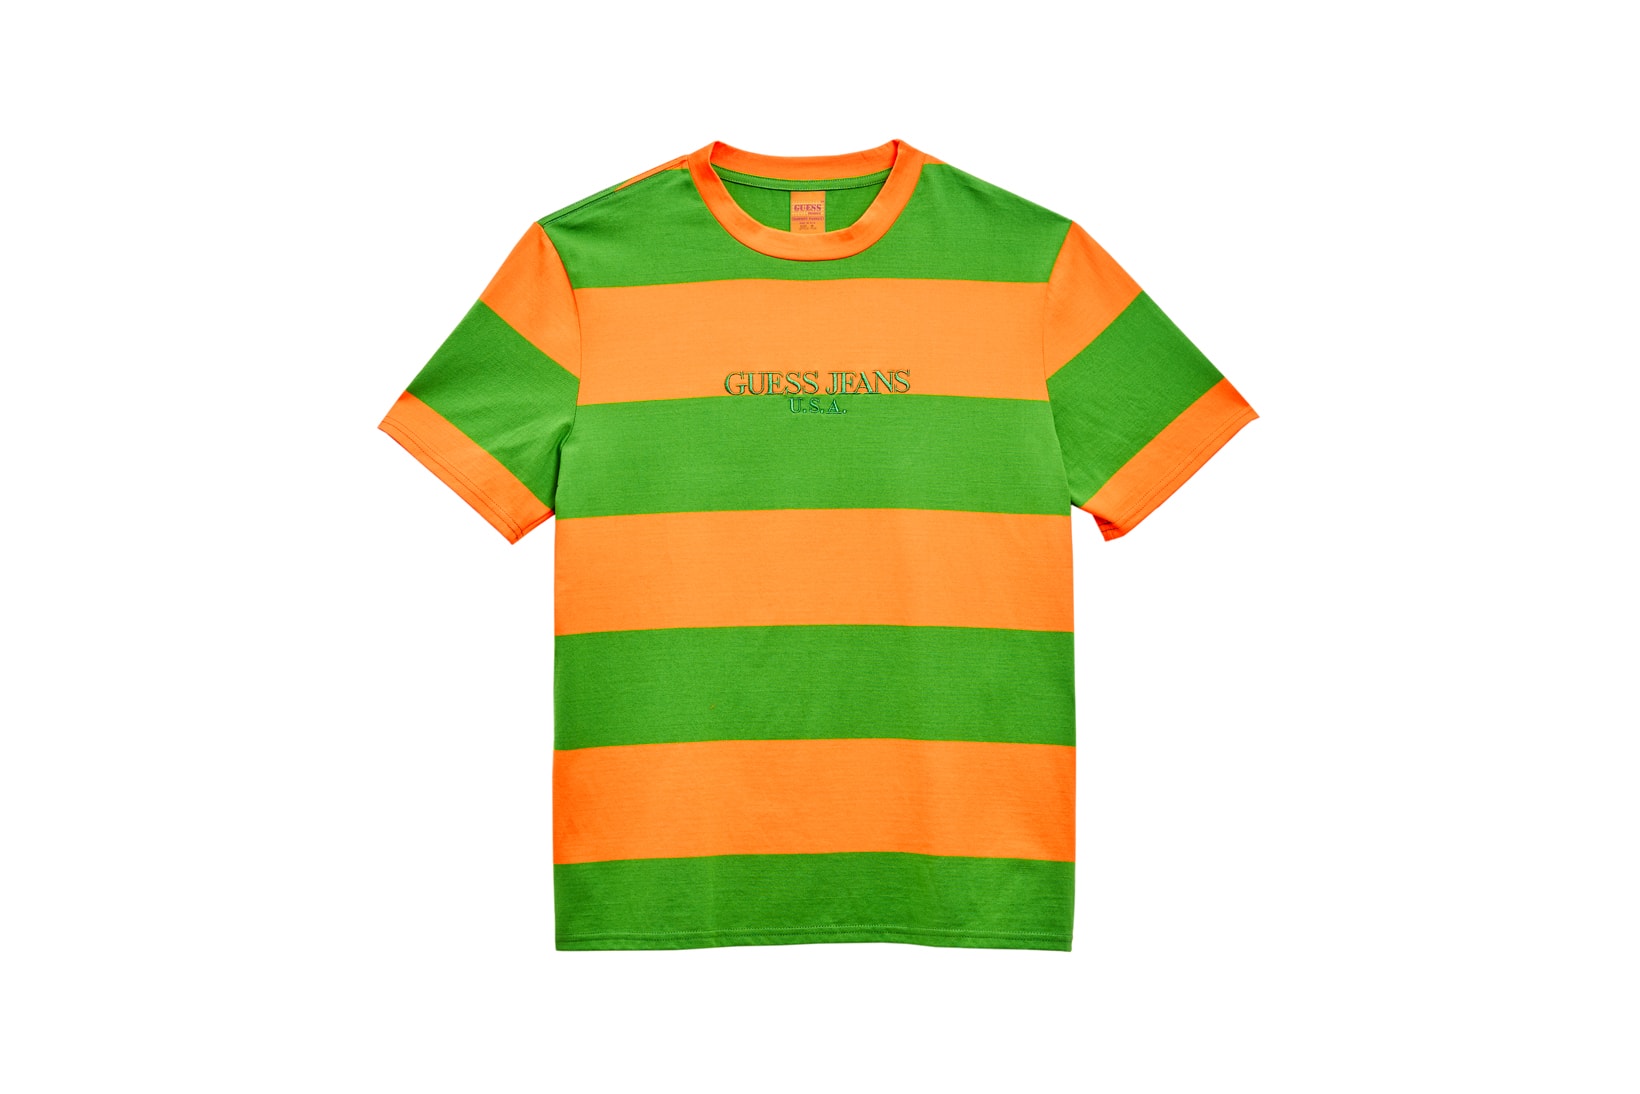 GUESS Jeans U.S.A. Farmers Market Capsule Collection Striped T-Shirt Orange Green